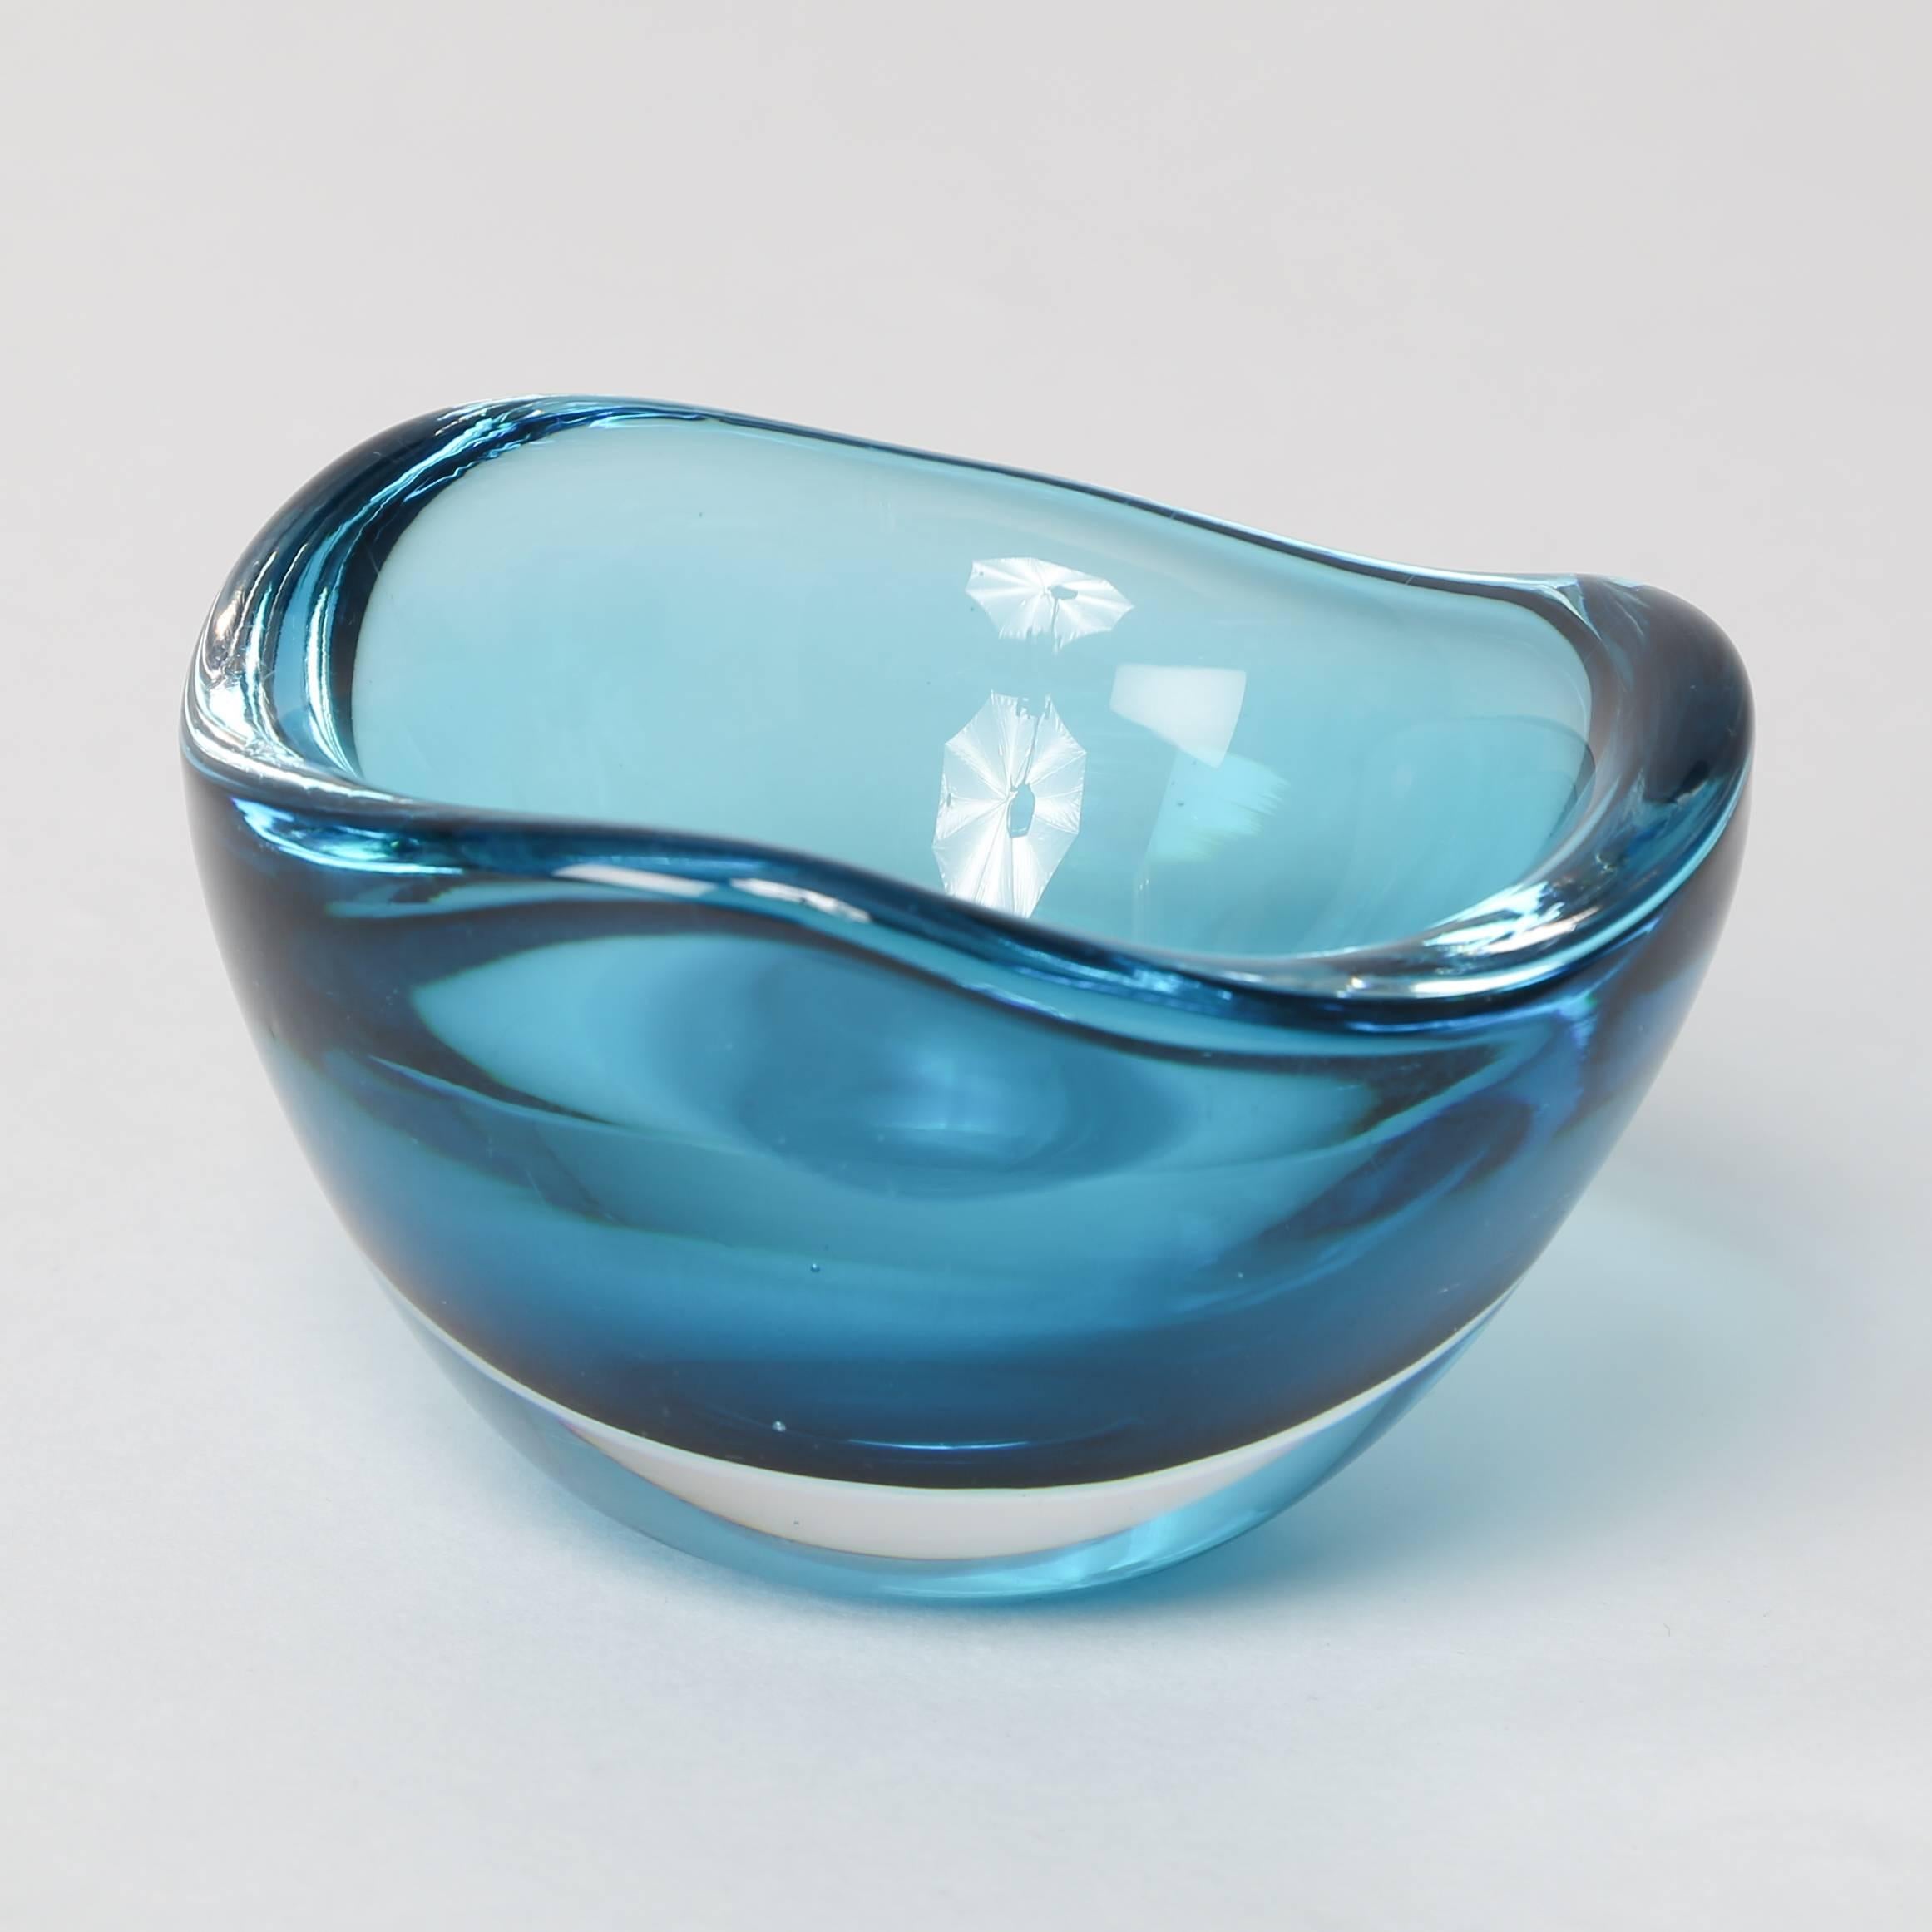 Mid-20th Century Collection of 1960s Blue-Glass “Selena” Vases by Sven Palmqvist for Orrefors